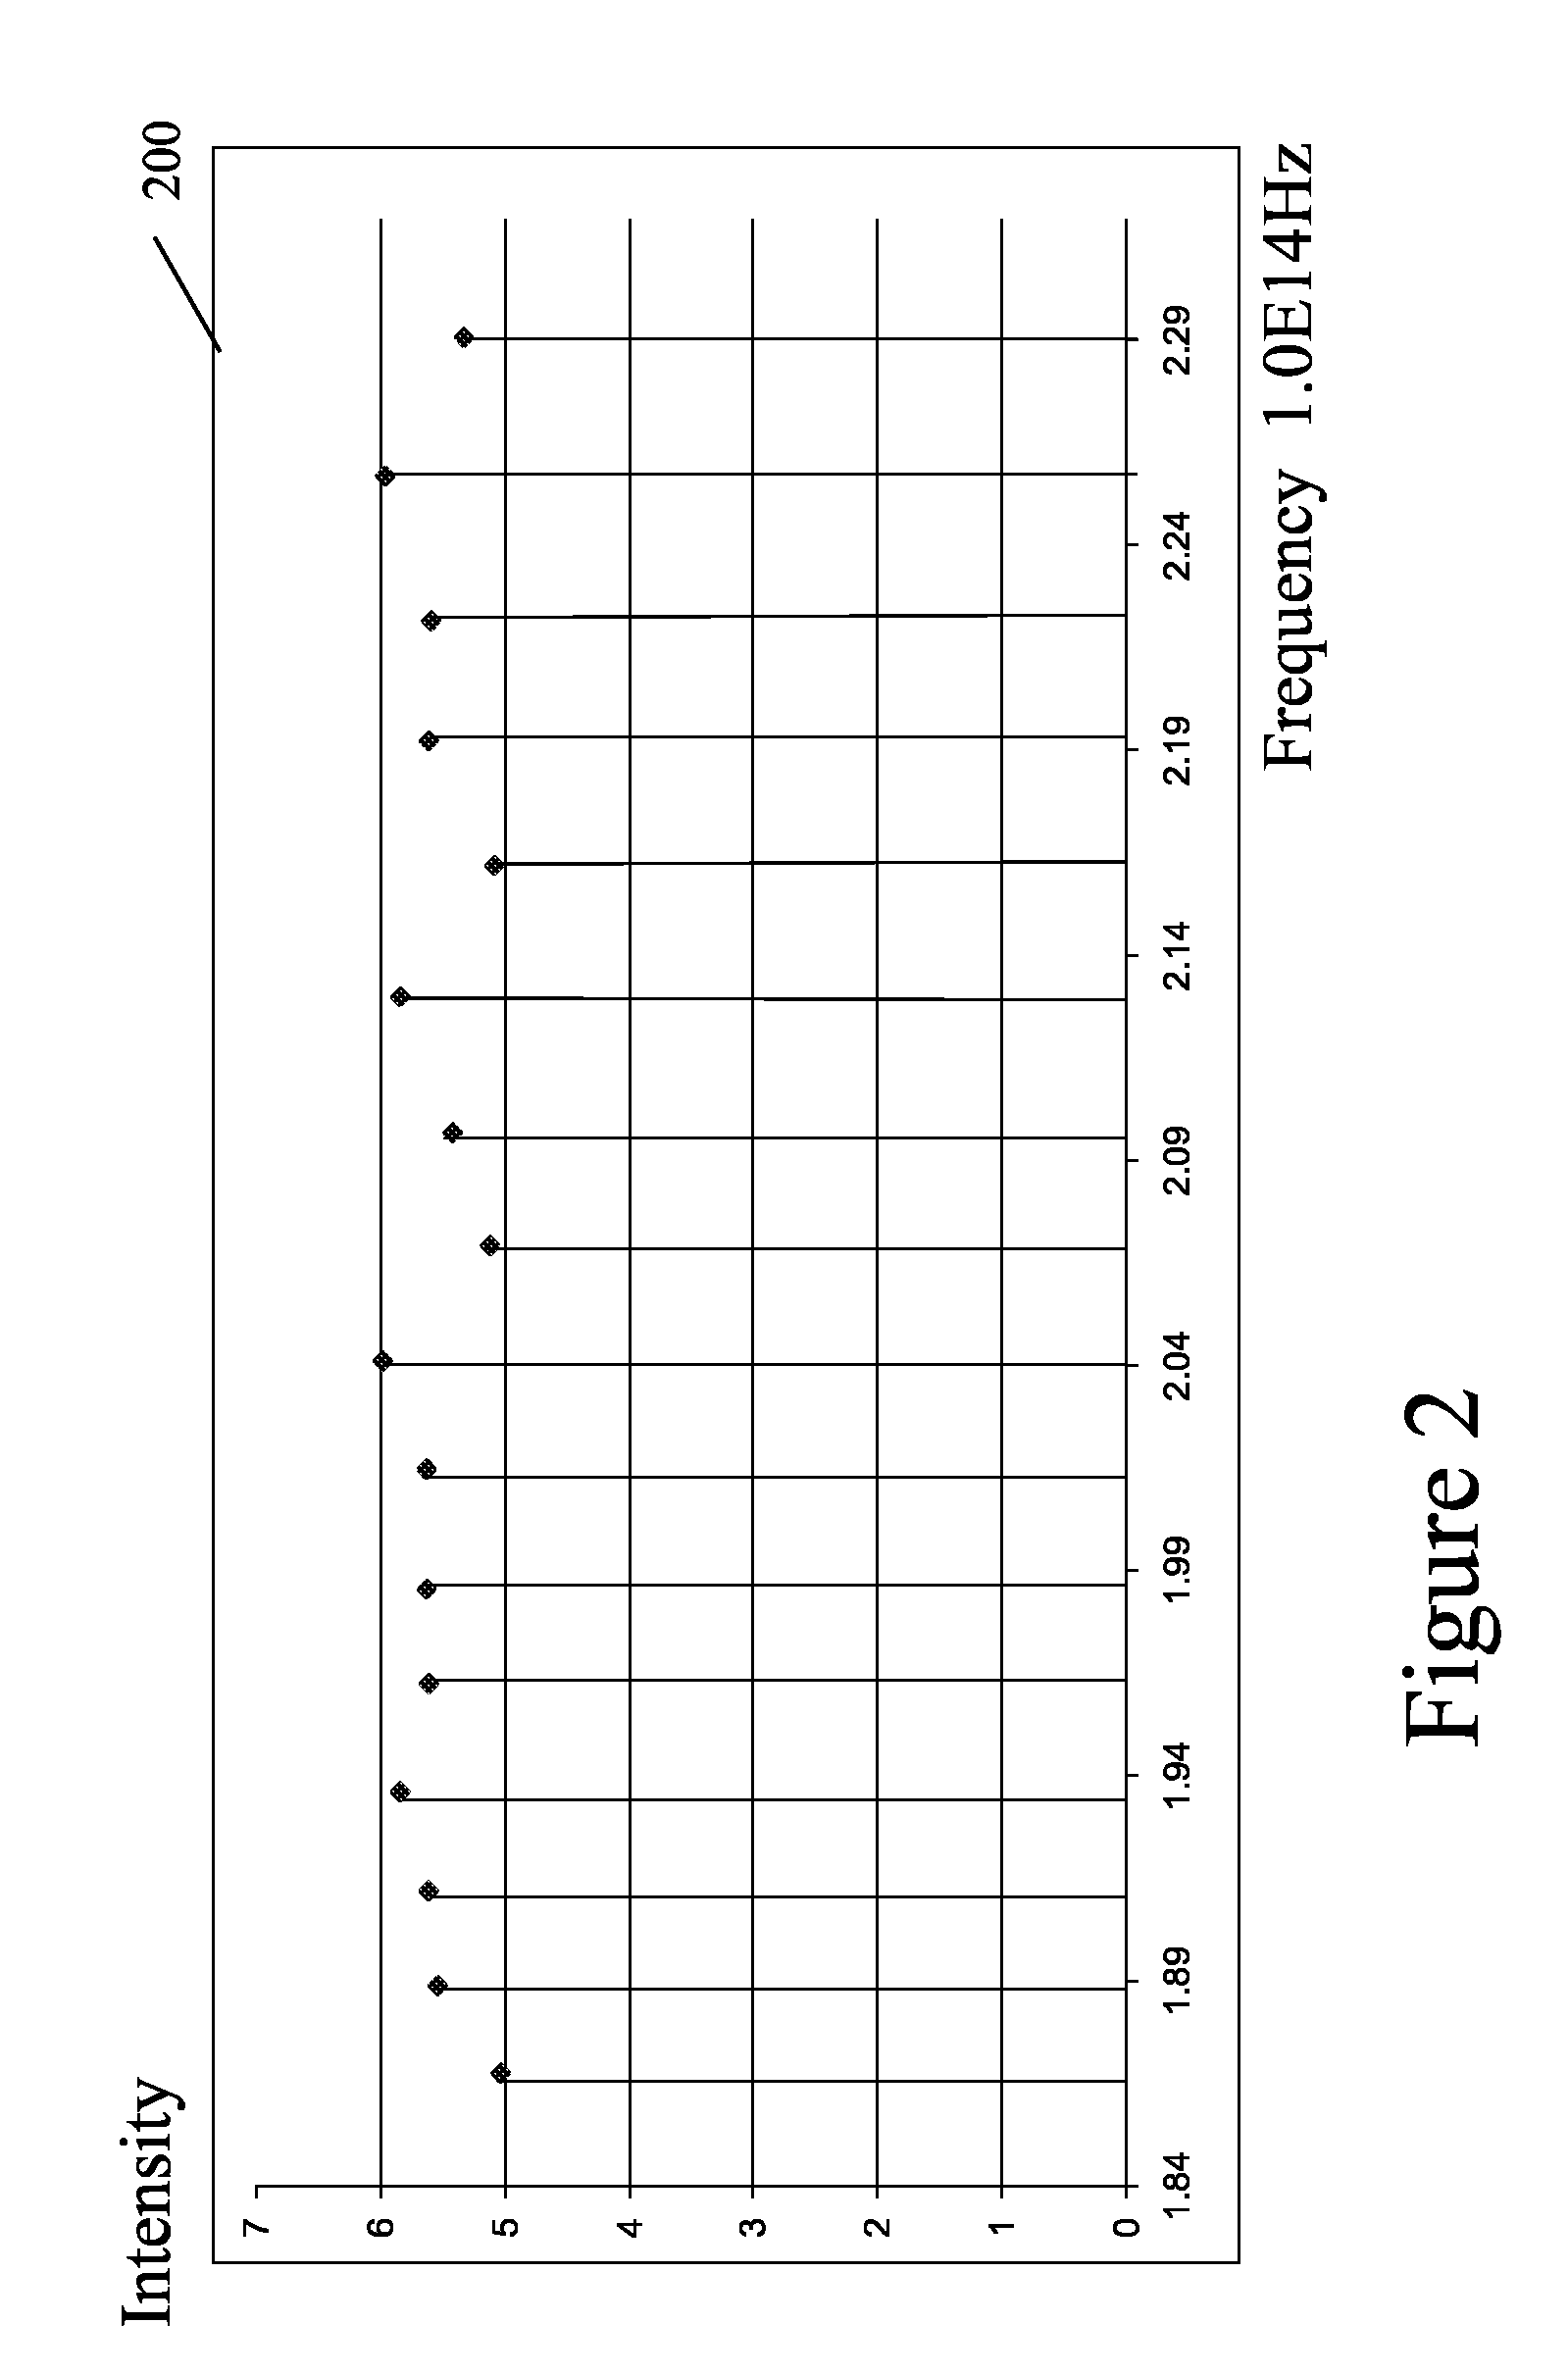 Instantaneous, phase measuring interferometer apparatus and method